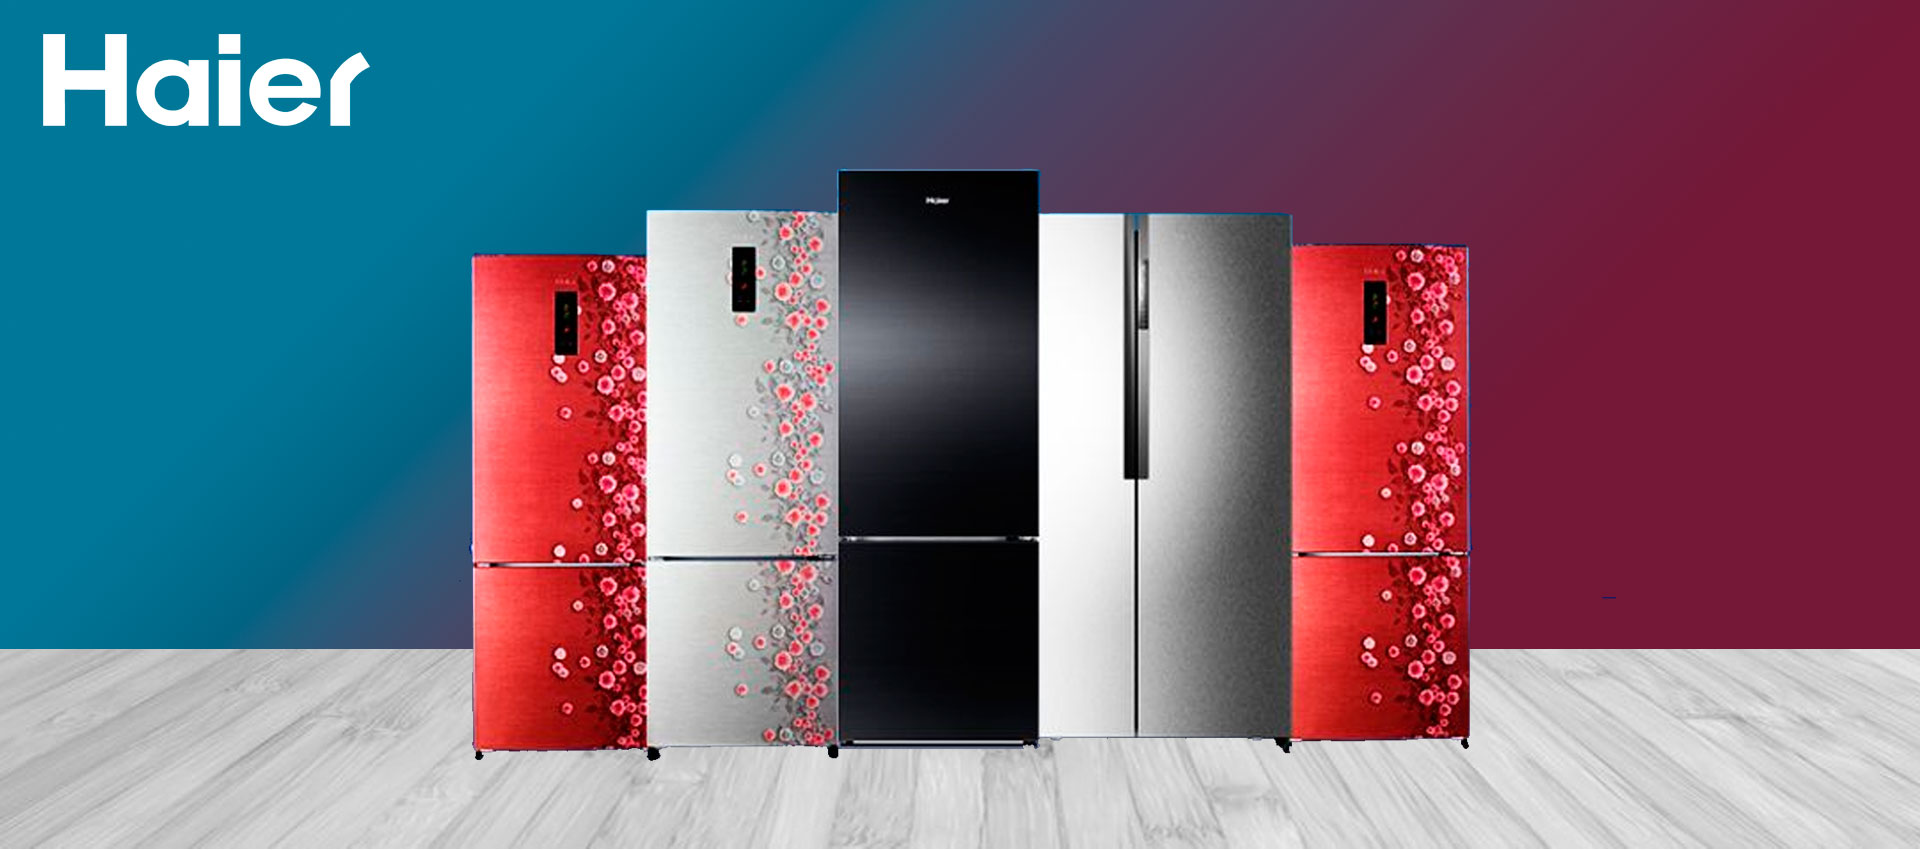 Haier Refrigerators in Pakistan - Stepping Ahead in Technology 2020